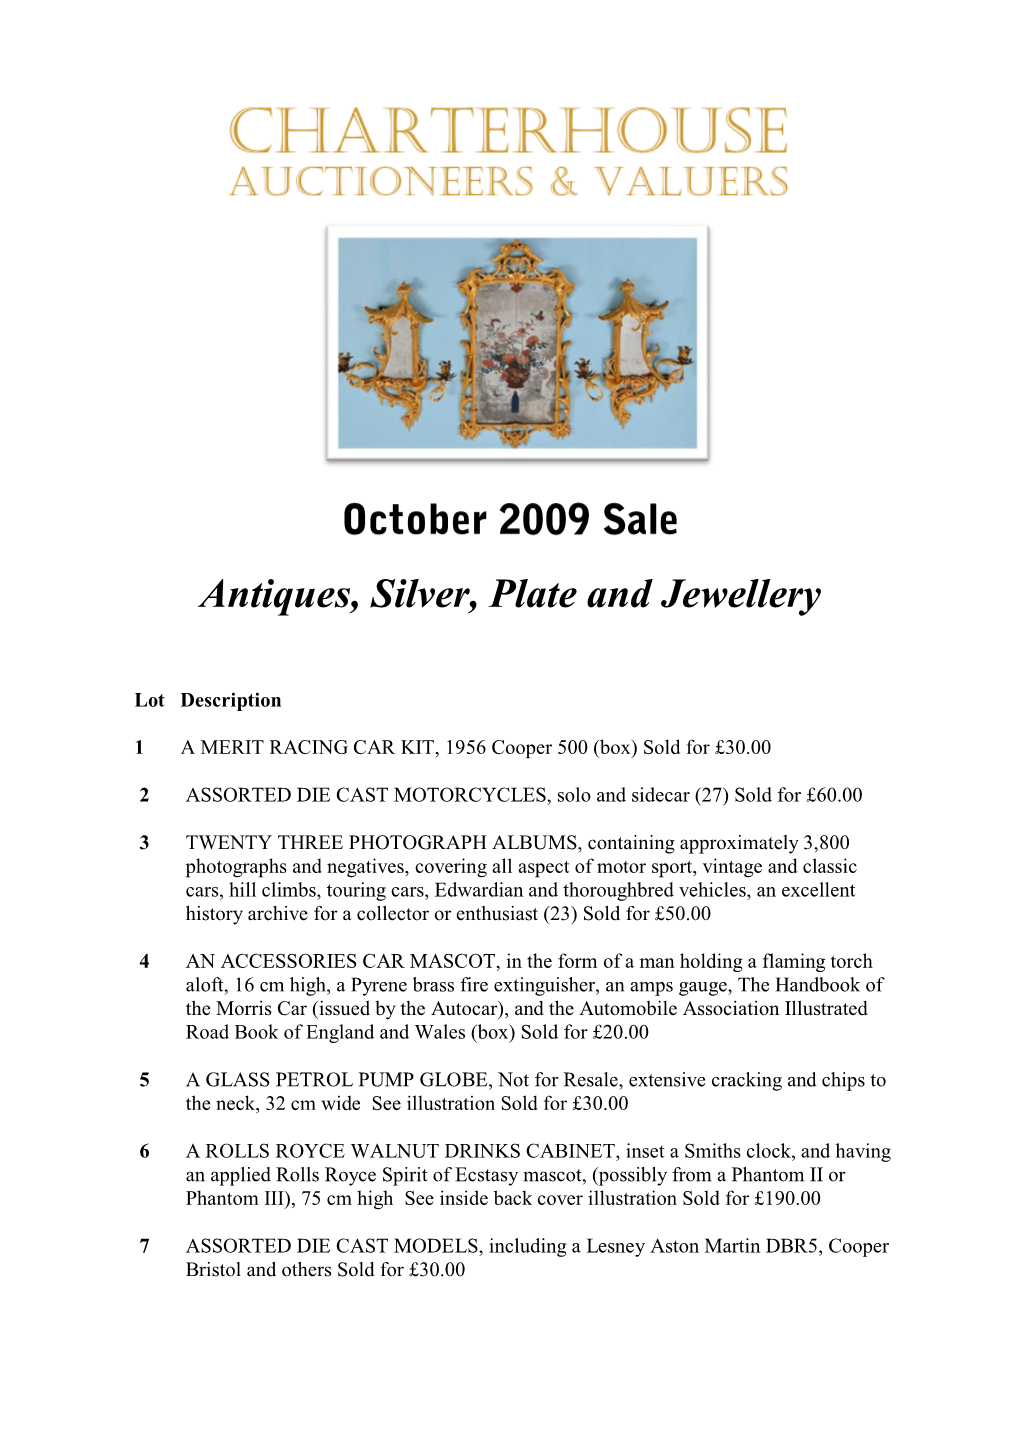 Antiques, Silver, Plate and Jewellery